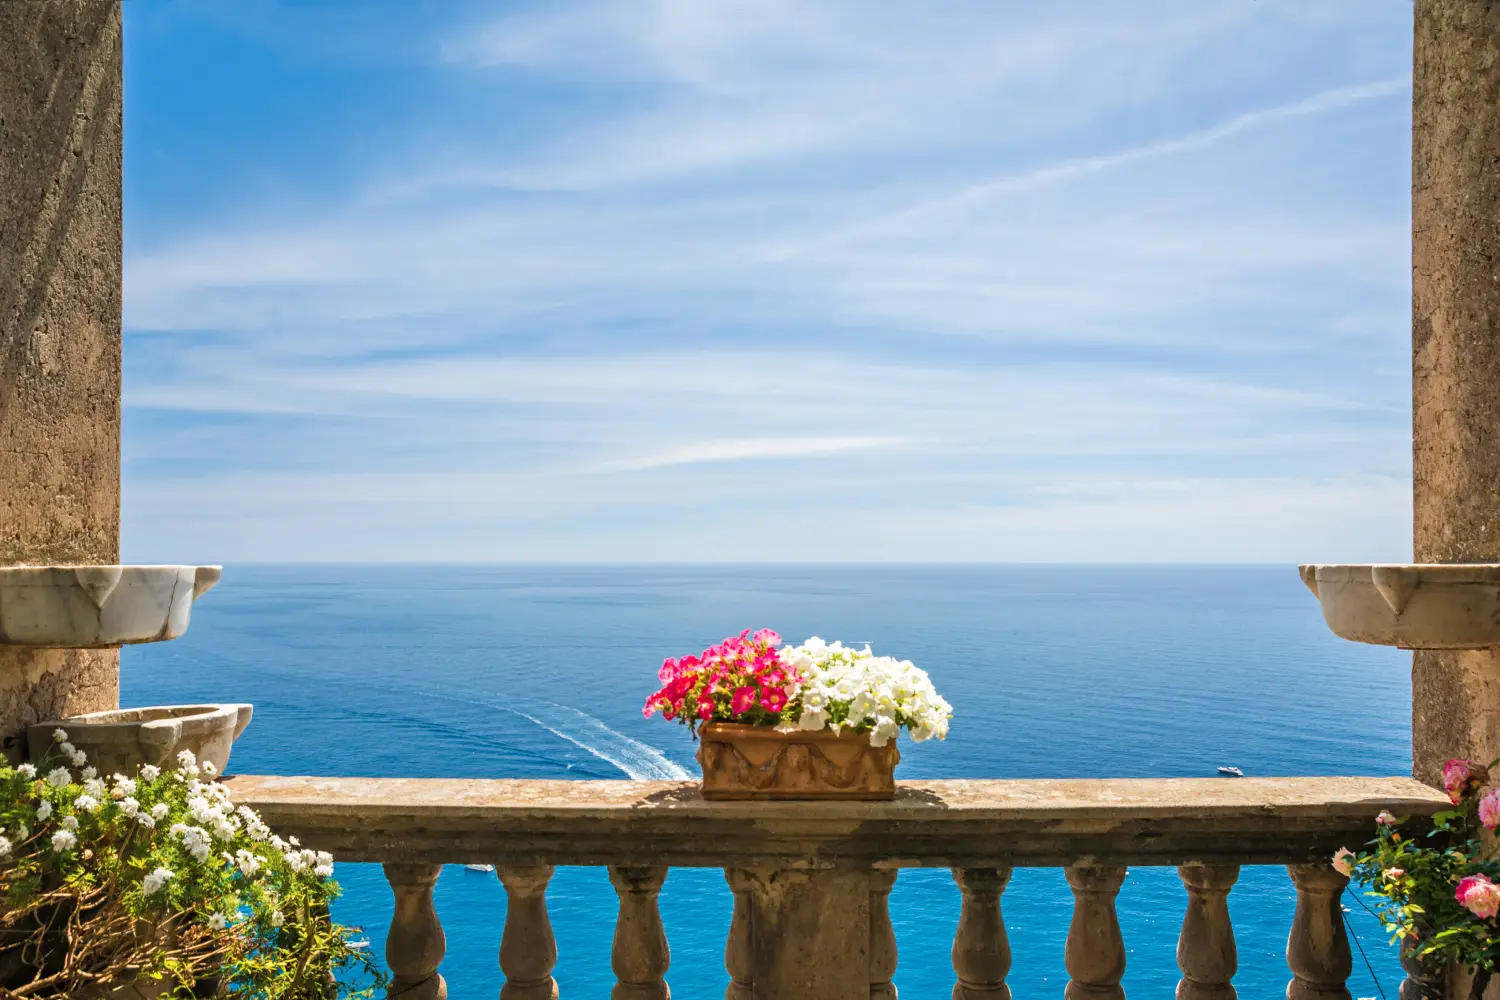 Ferry to Positano - Beautiful sea view in the town of Positano from antique terrace with flowers, Amalfi coast, Italy. balcony with flowers.